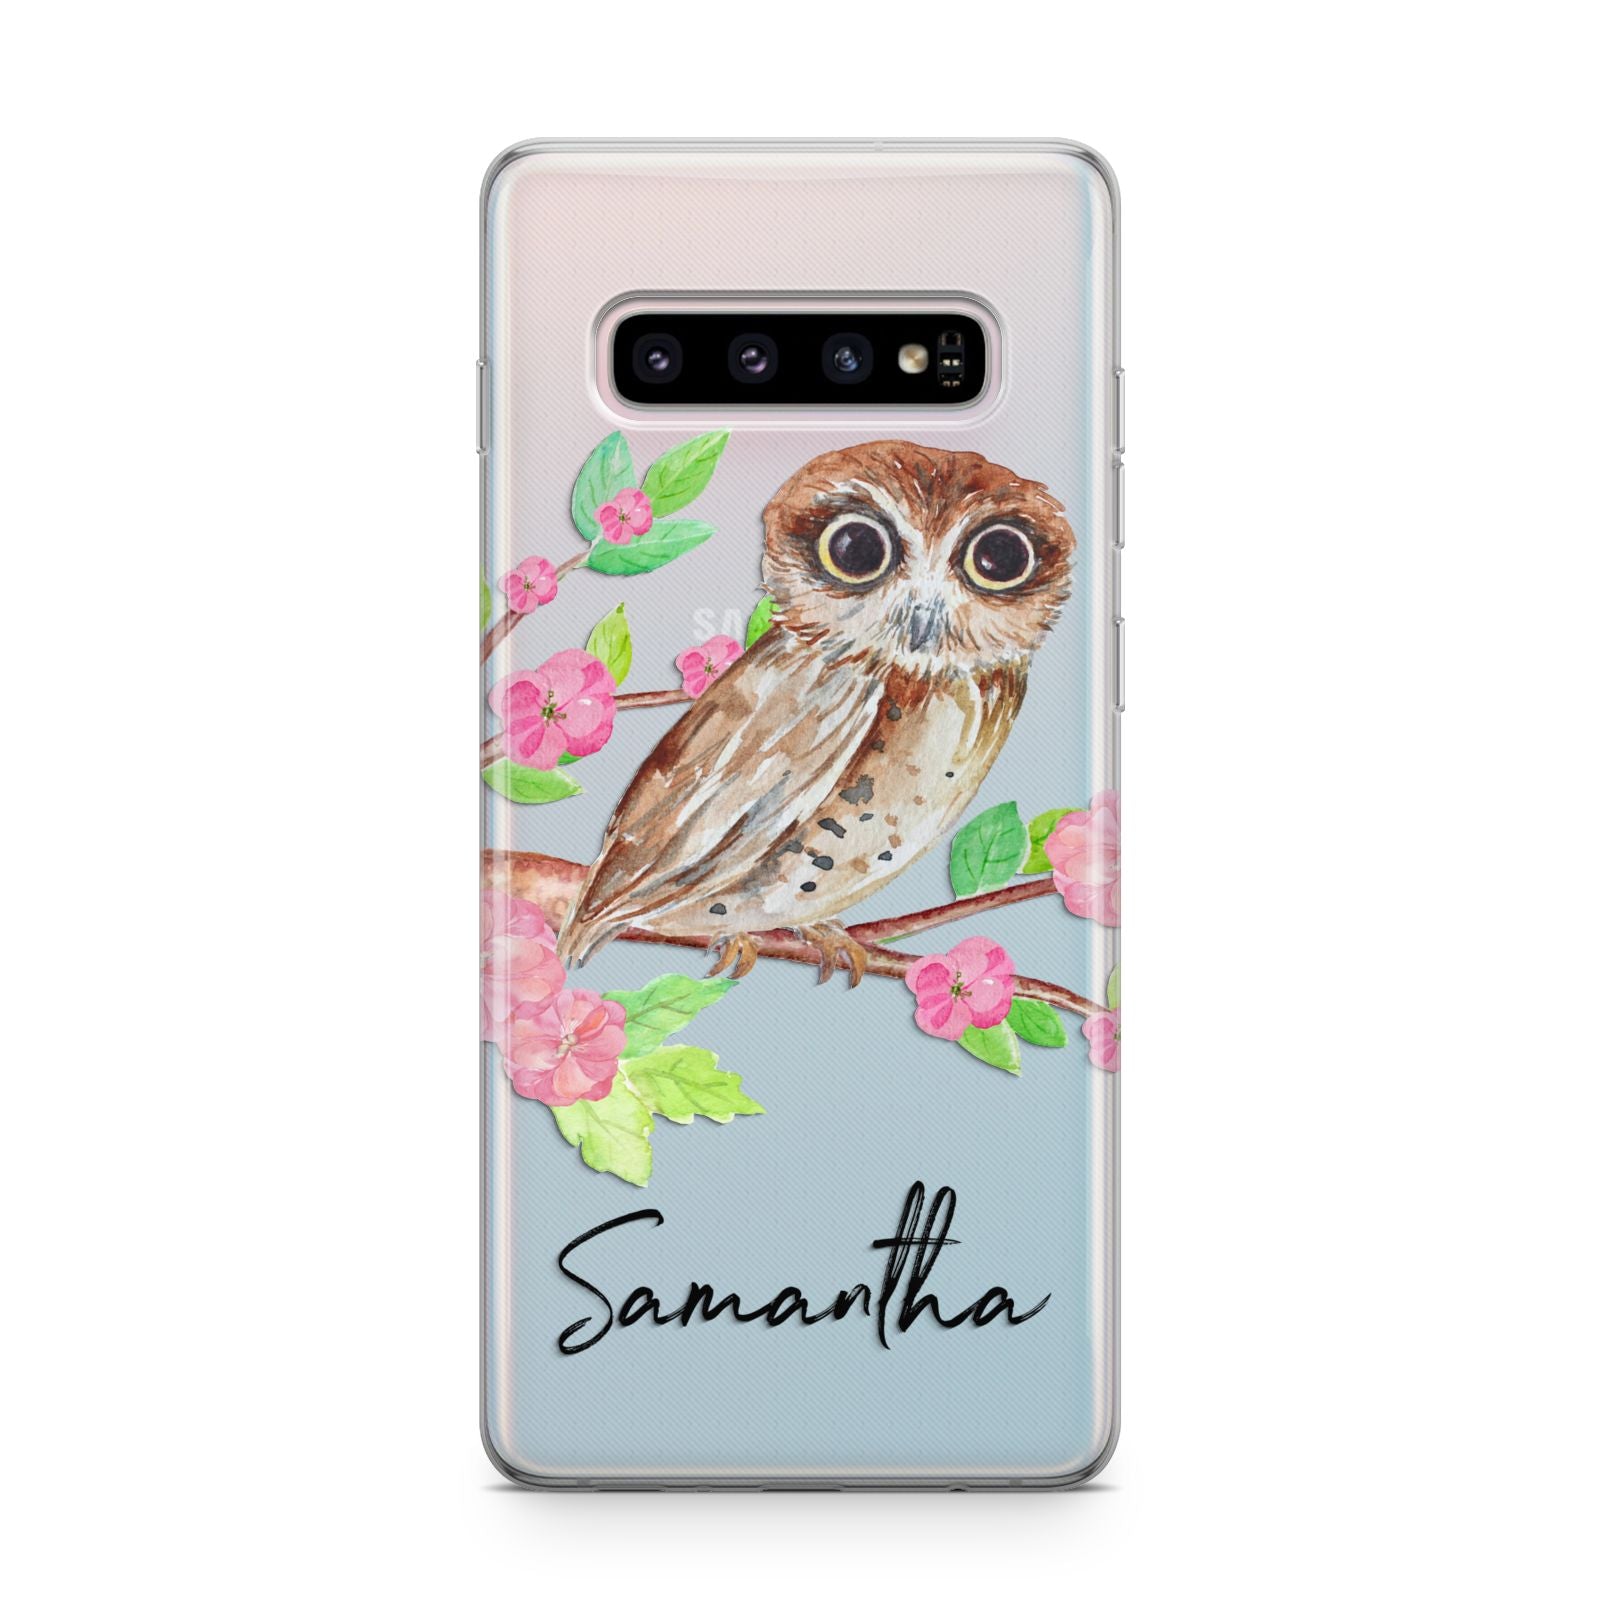 Personalised Owl Samsung Galaxy S10 Plus Case